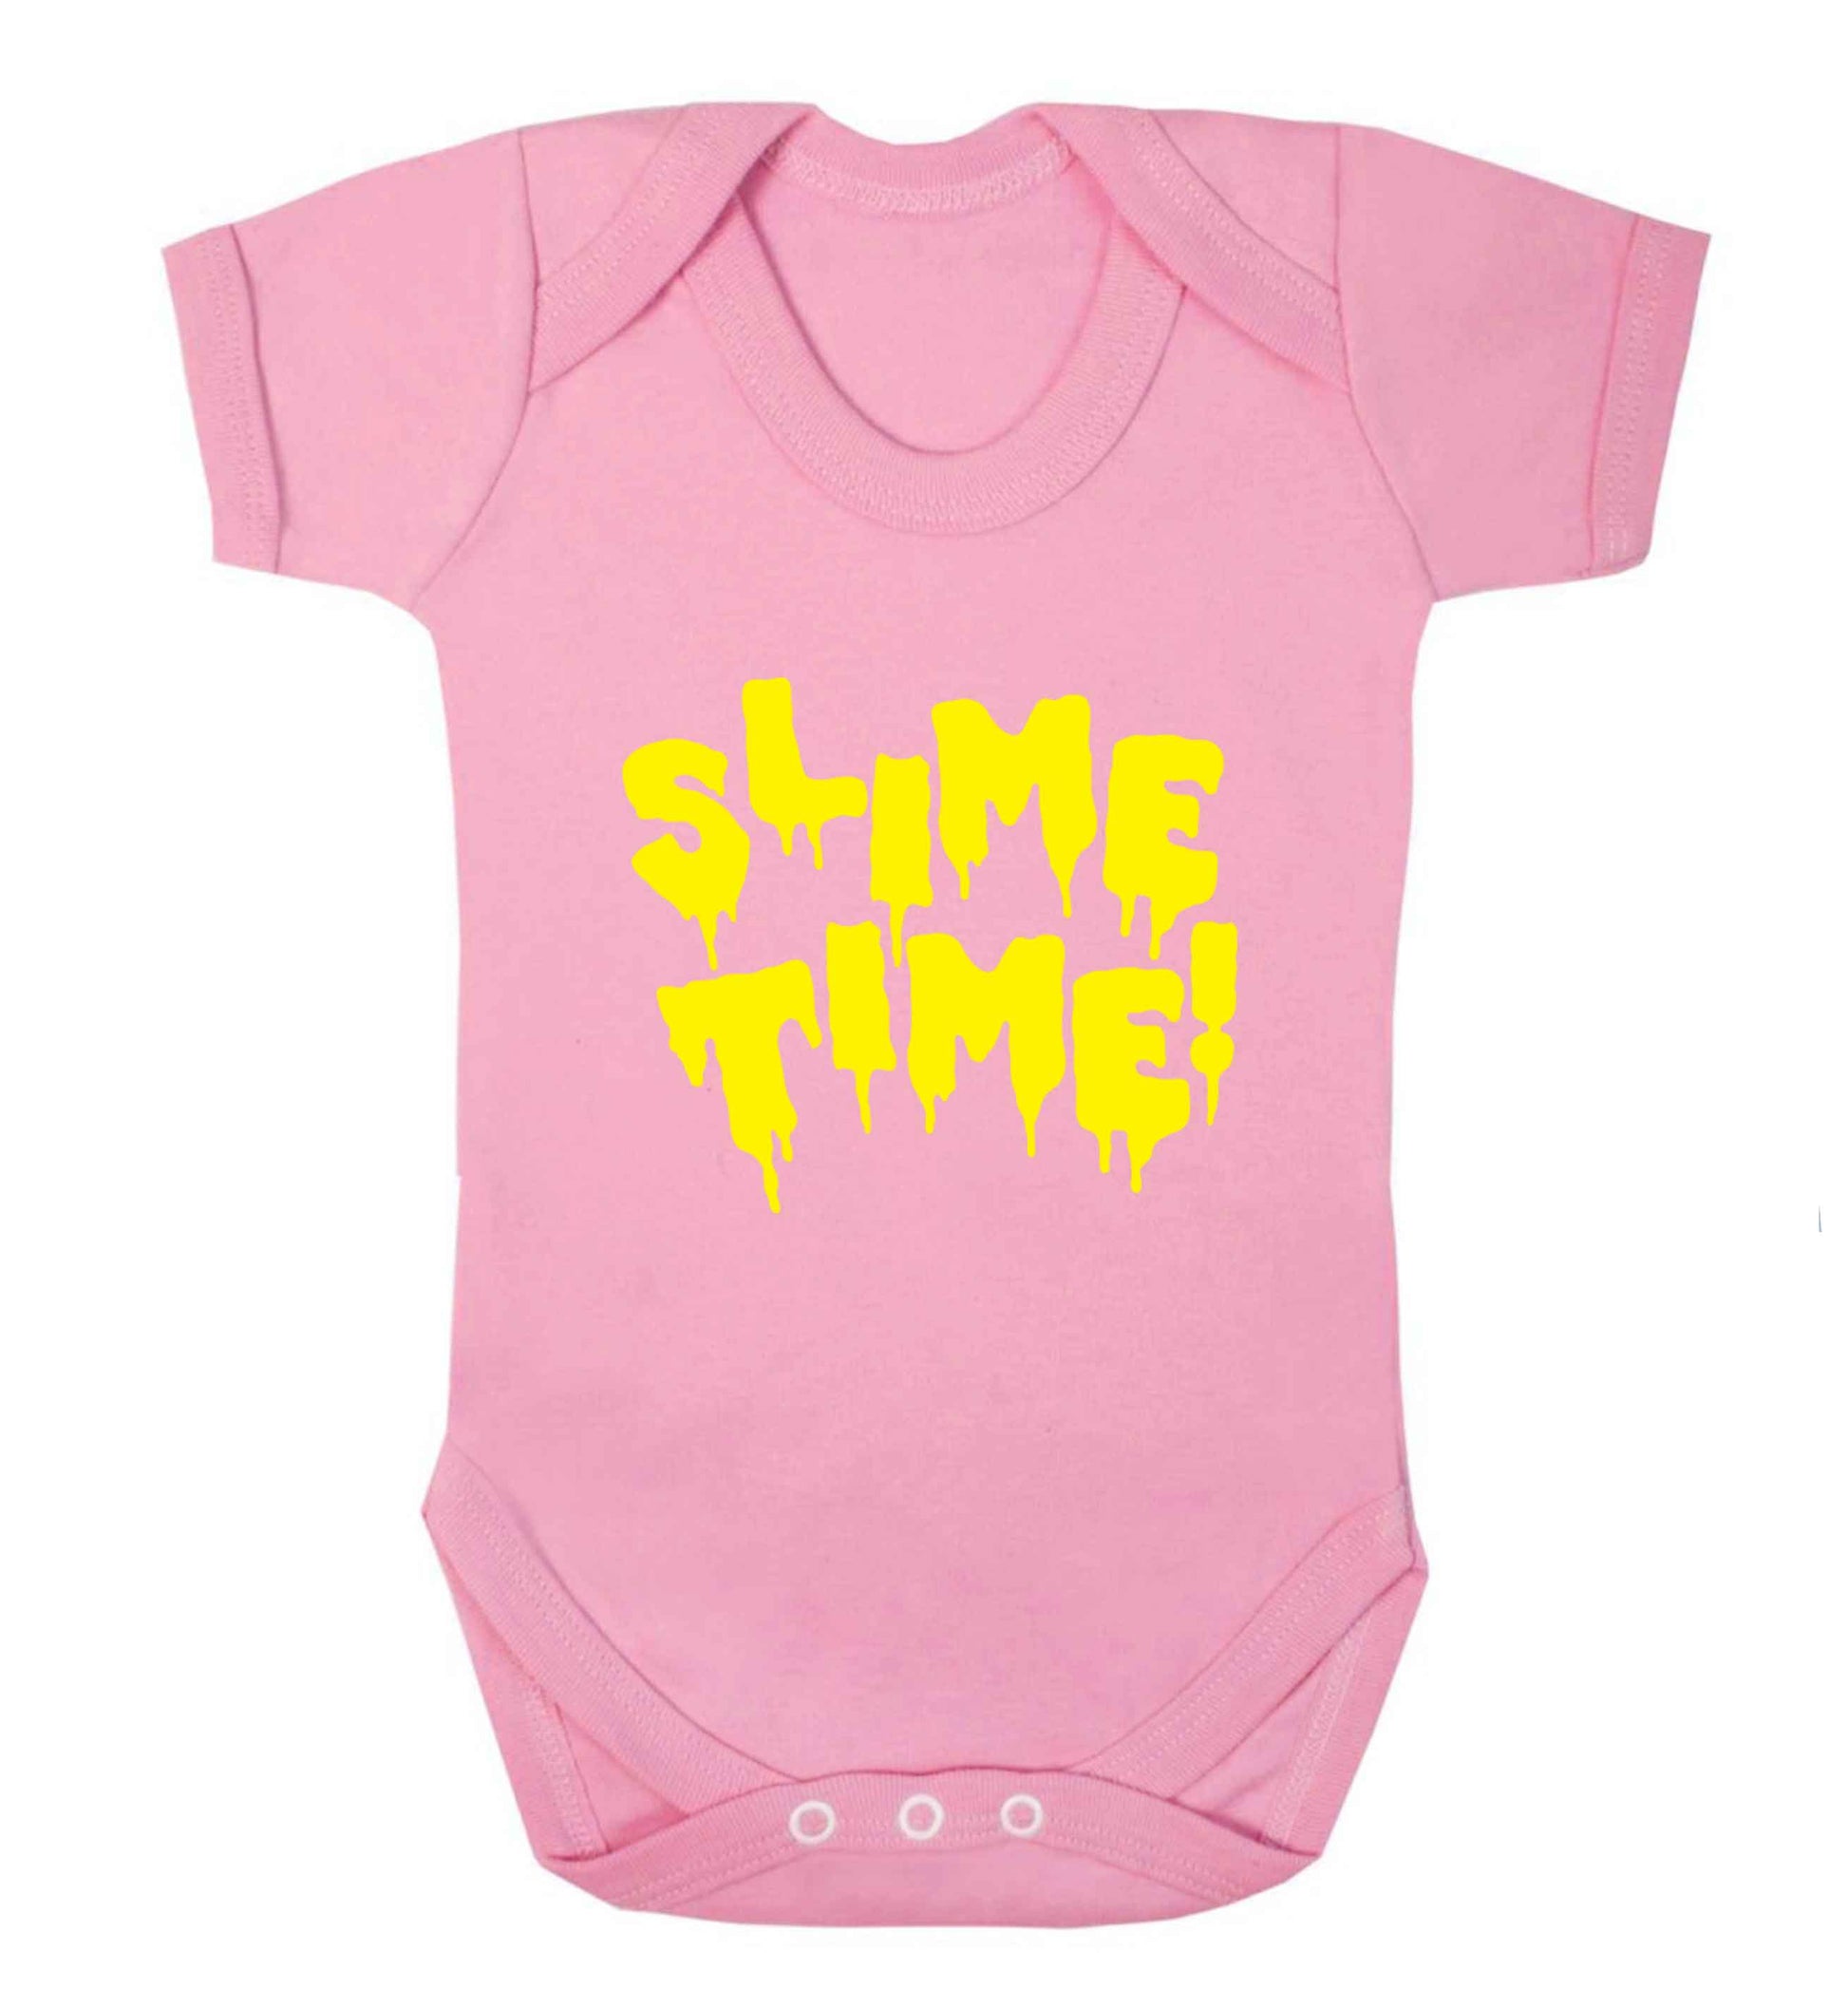 Neon yellow slime time baby vest pale pink 18-24 months